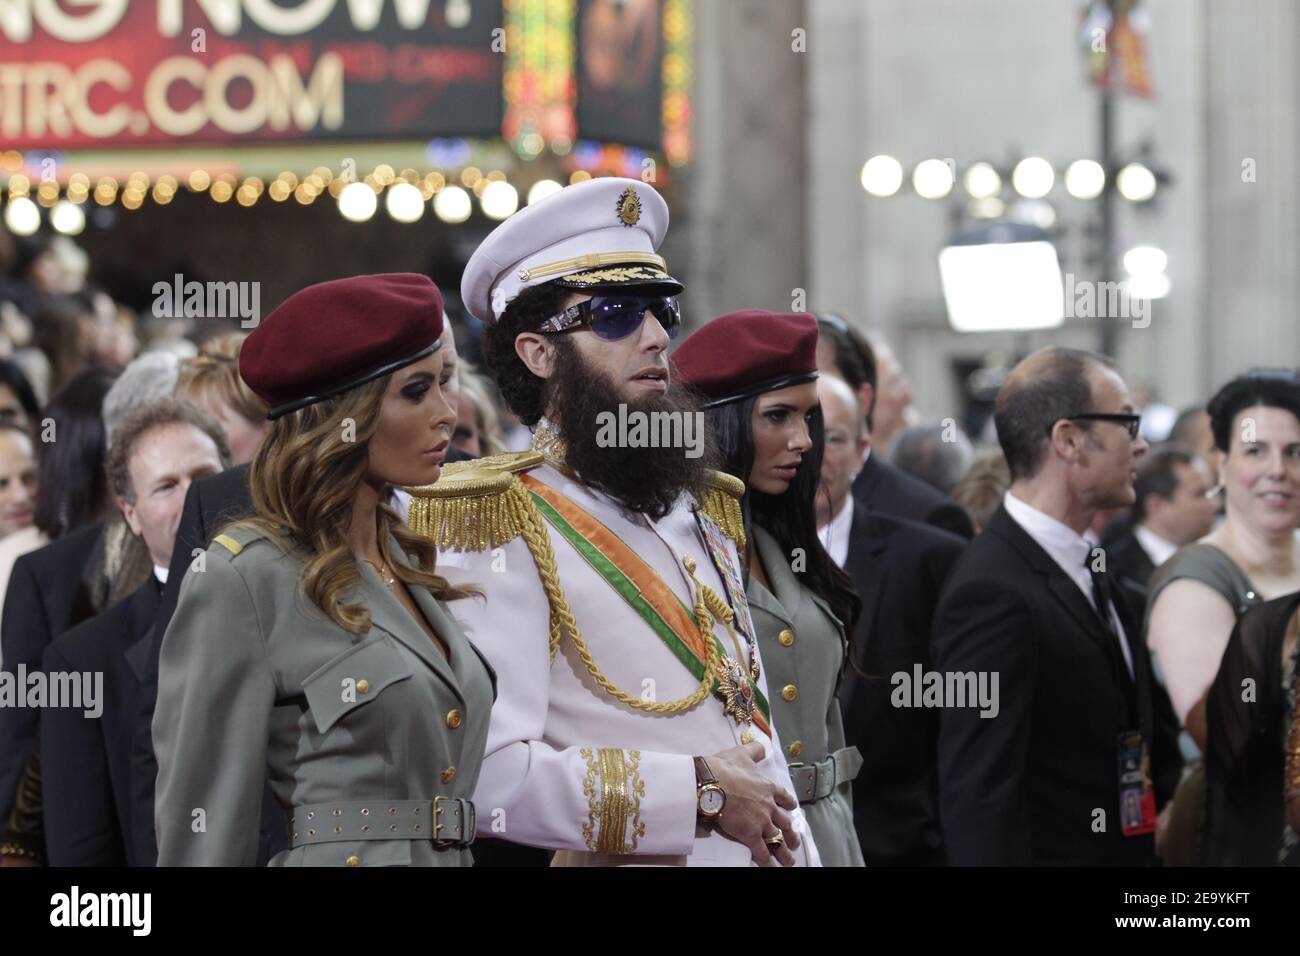 OSCARS - Red Carpet - Sacha Baron Cohen dressed as Admiral General Aladeen, the dictator of the fictional Republic of Wadiya on the red carpet during the 84th Academy Awards in Los Angeles on February 26, 2012. Photo by Francis Specker Stock Photo